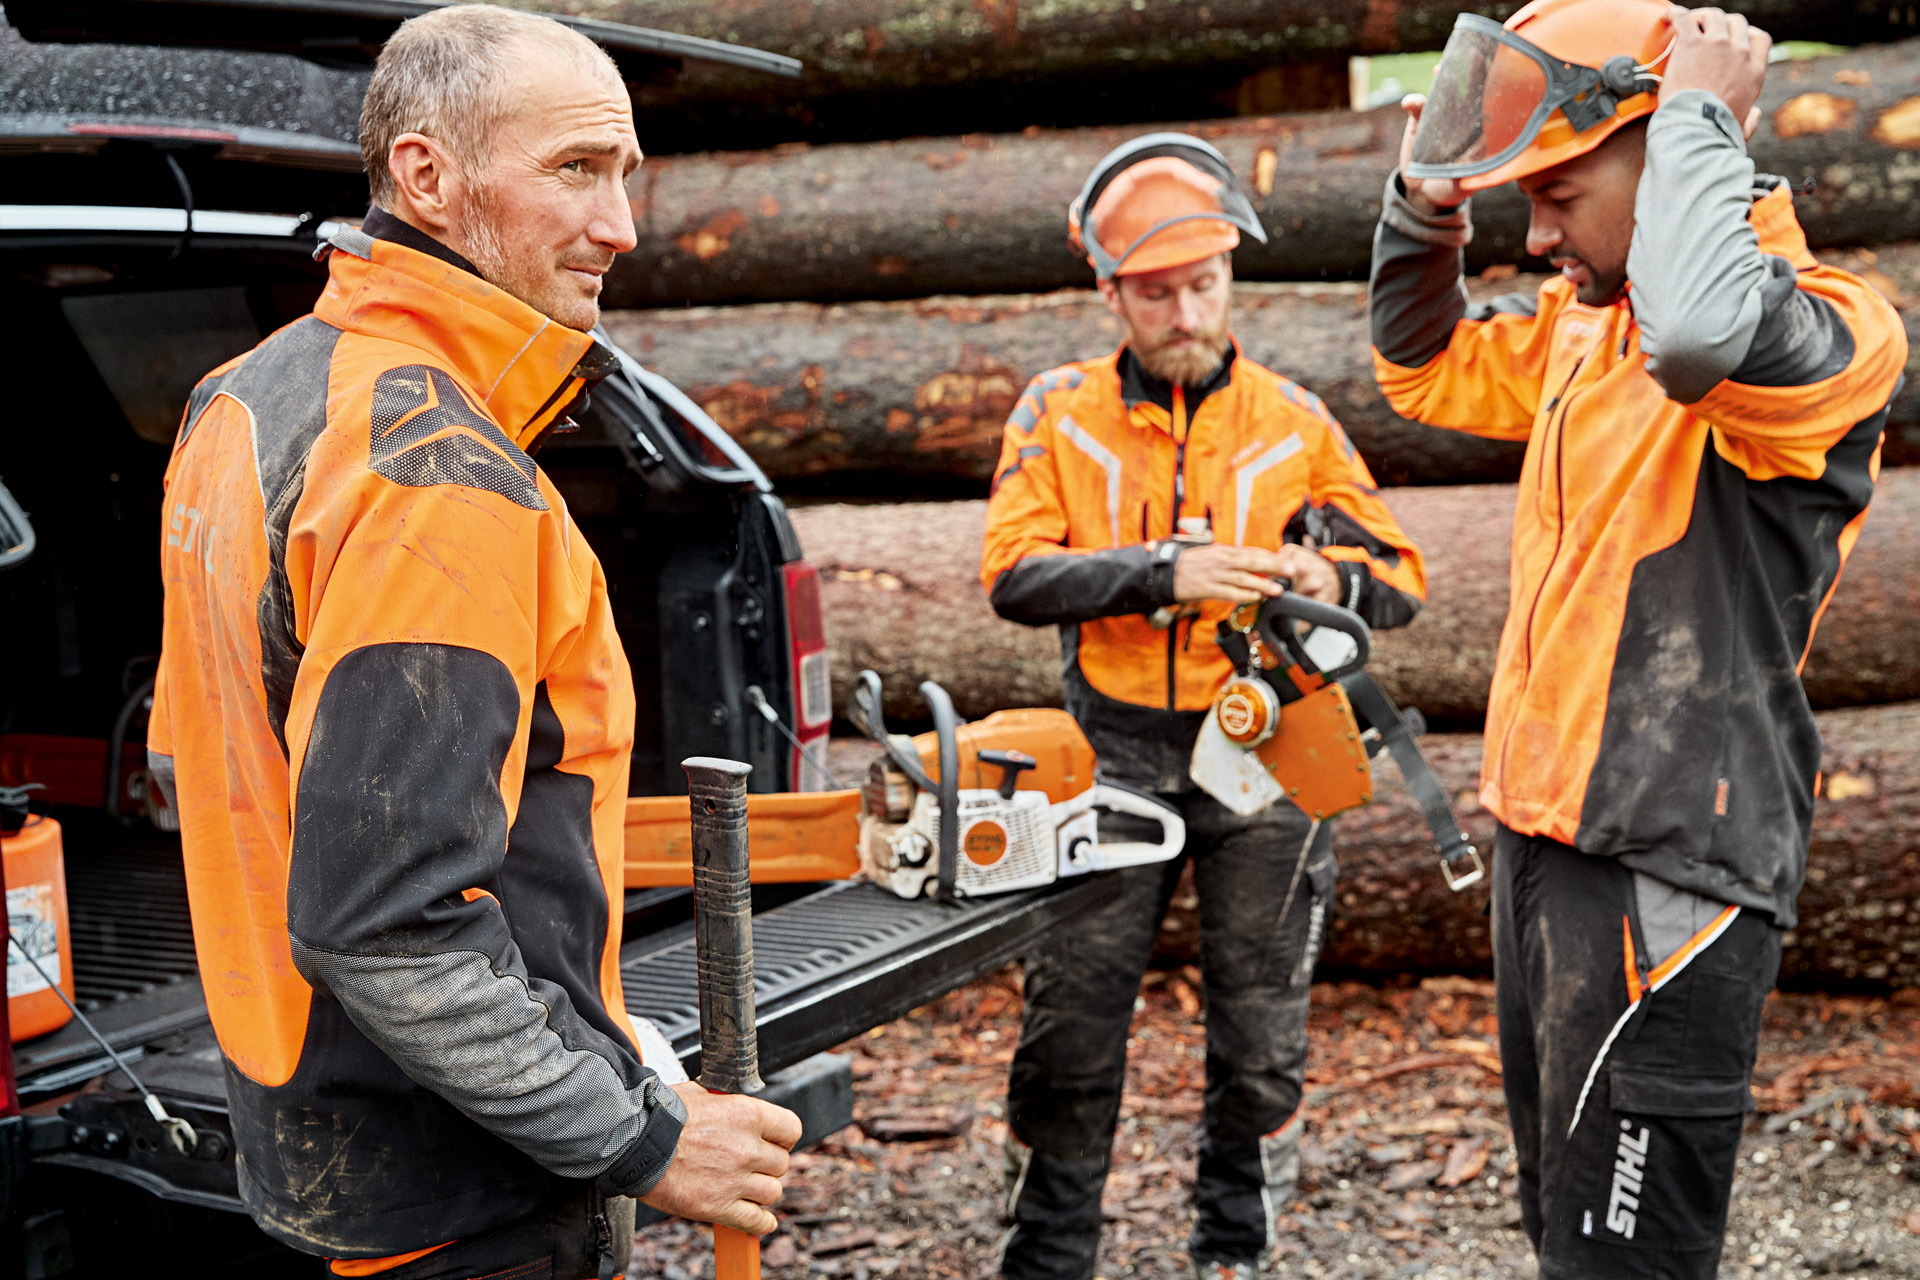 Three men wearing STIHL protective clothing, getting ready to use a STIHL chainsaw in front of a stack of wood